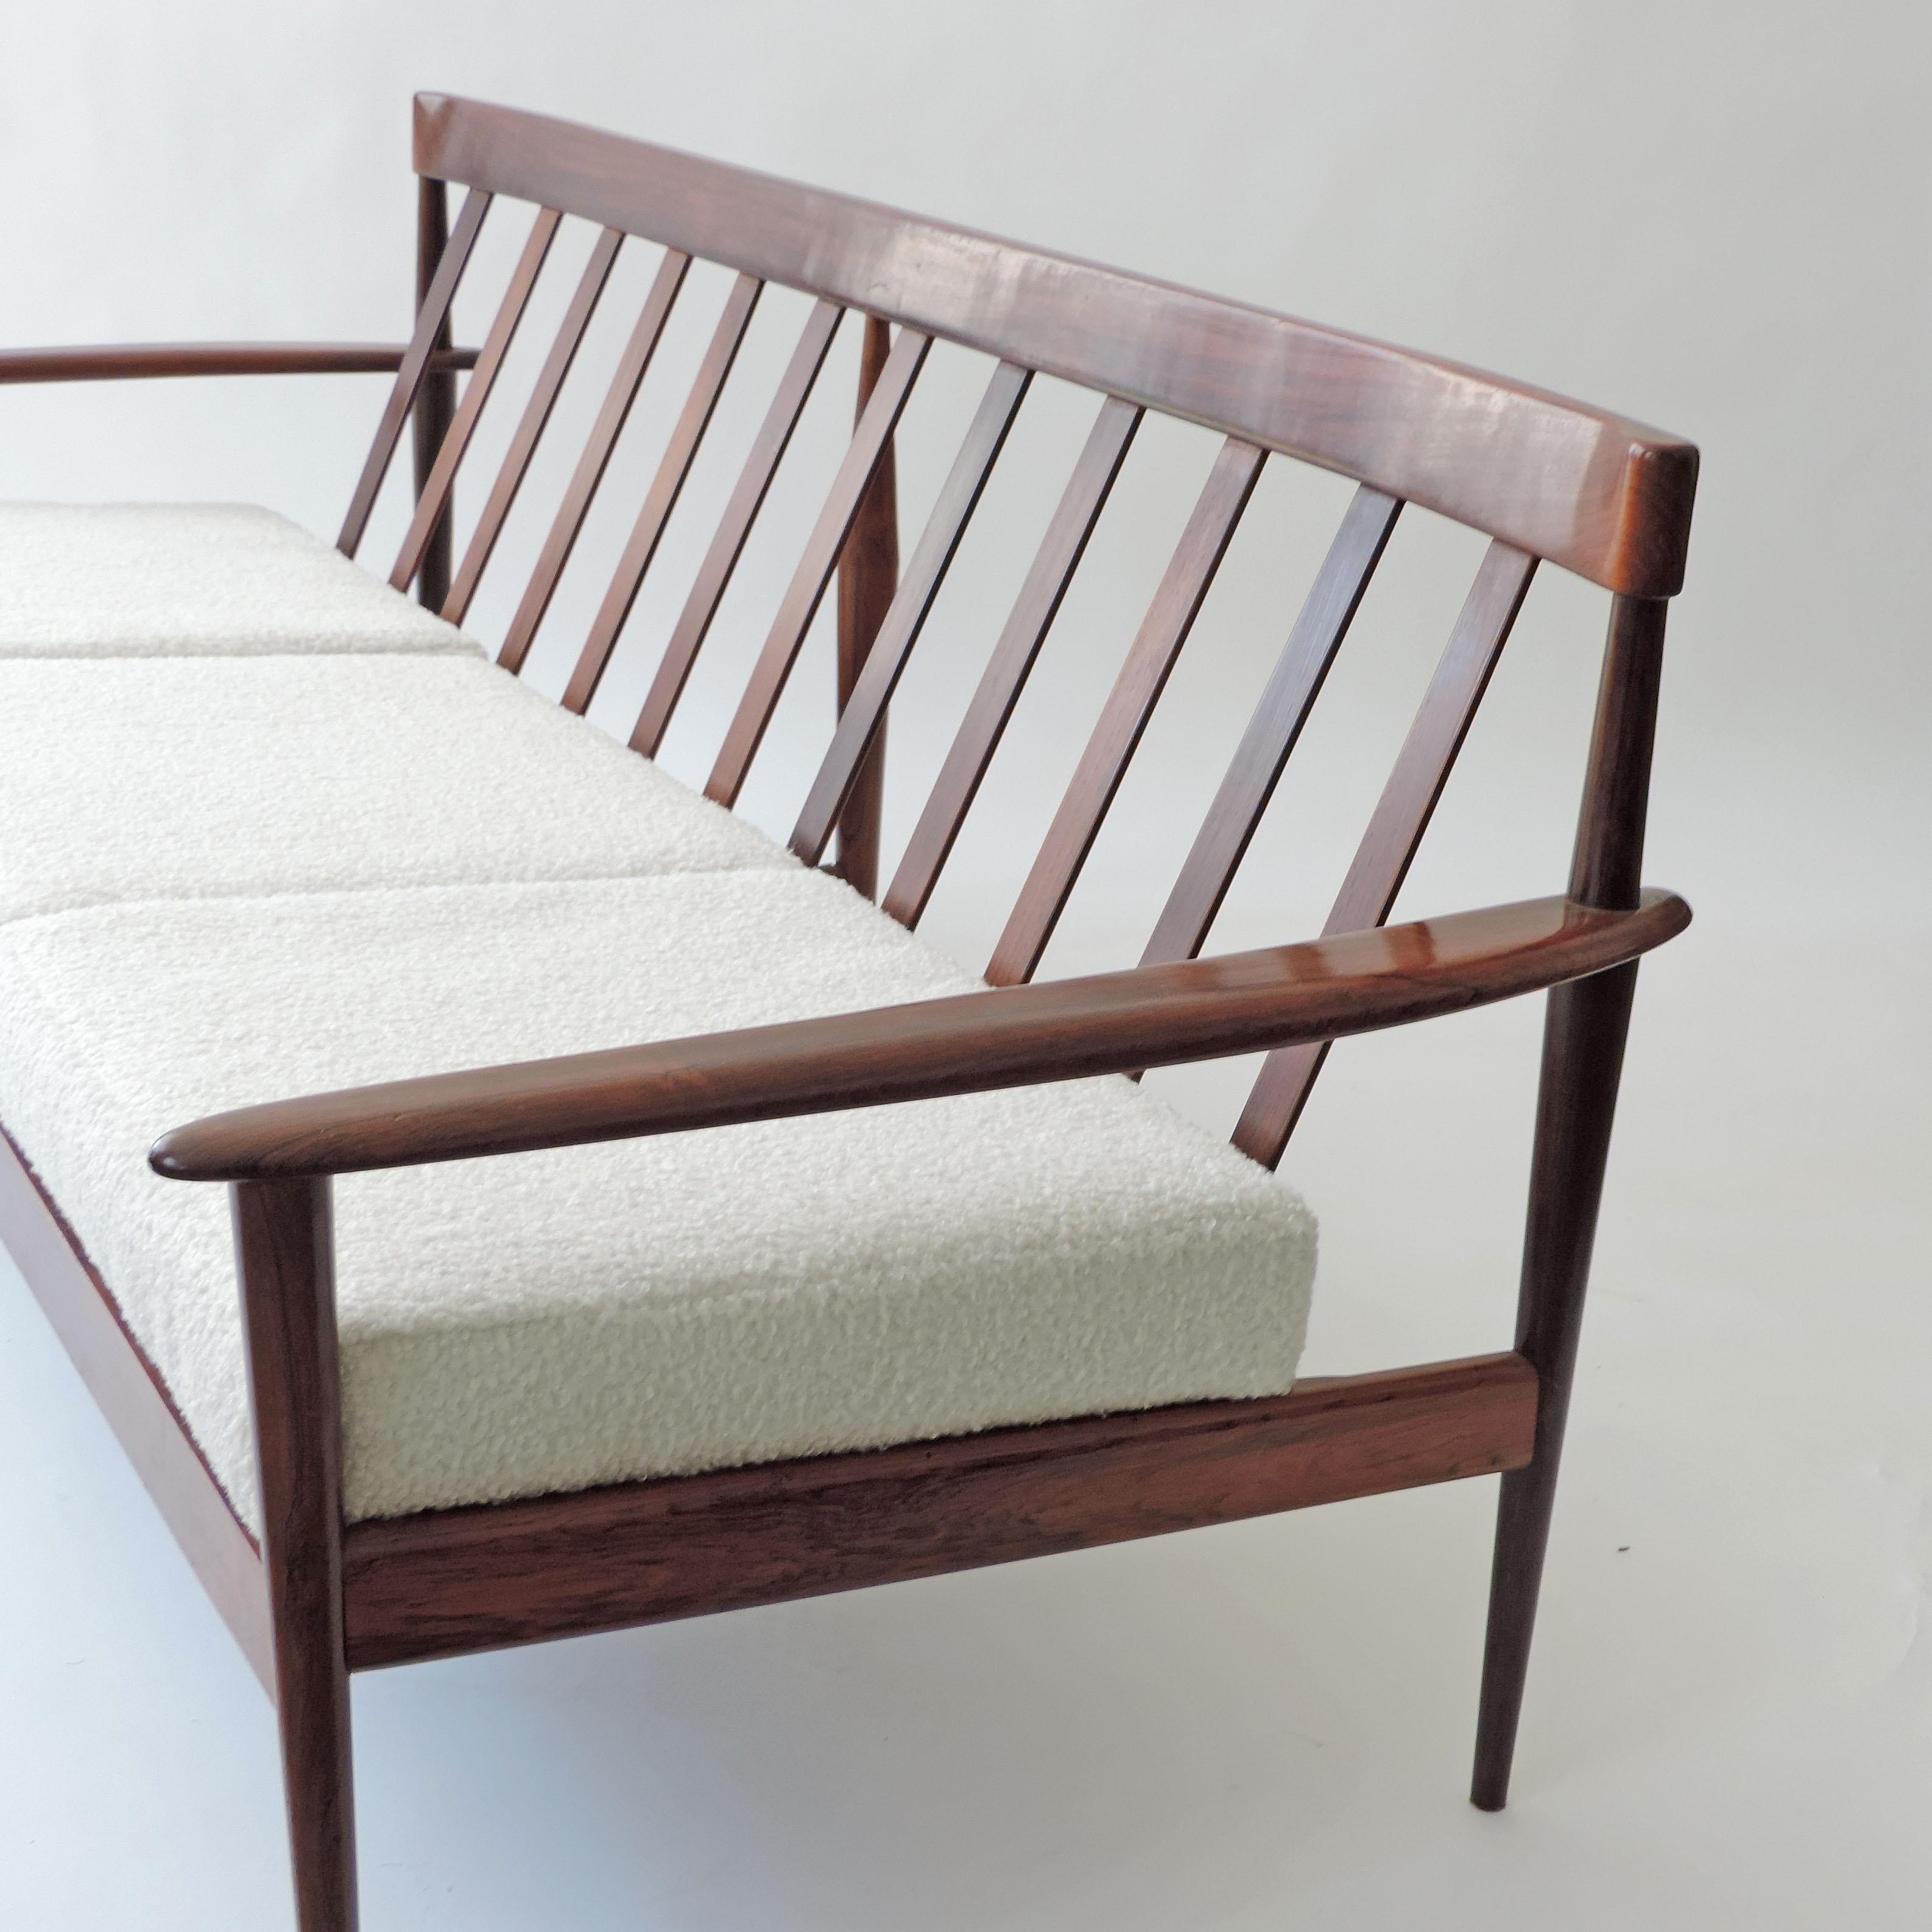 A splendid three-seat sofa attributed to Arch. Rino Levi also available two armchairs and a footrest.